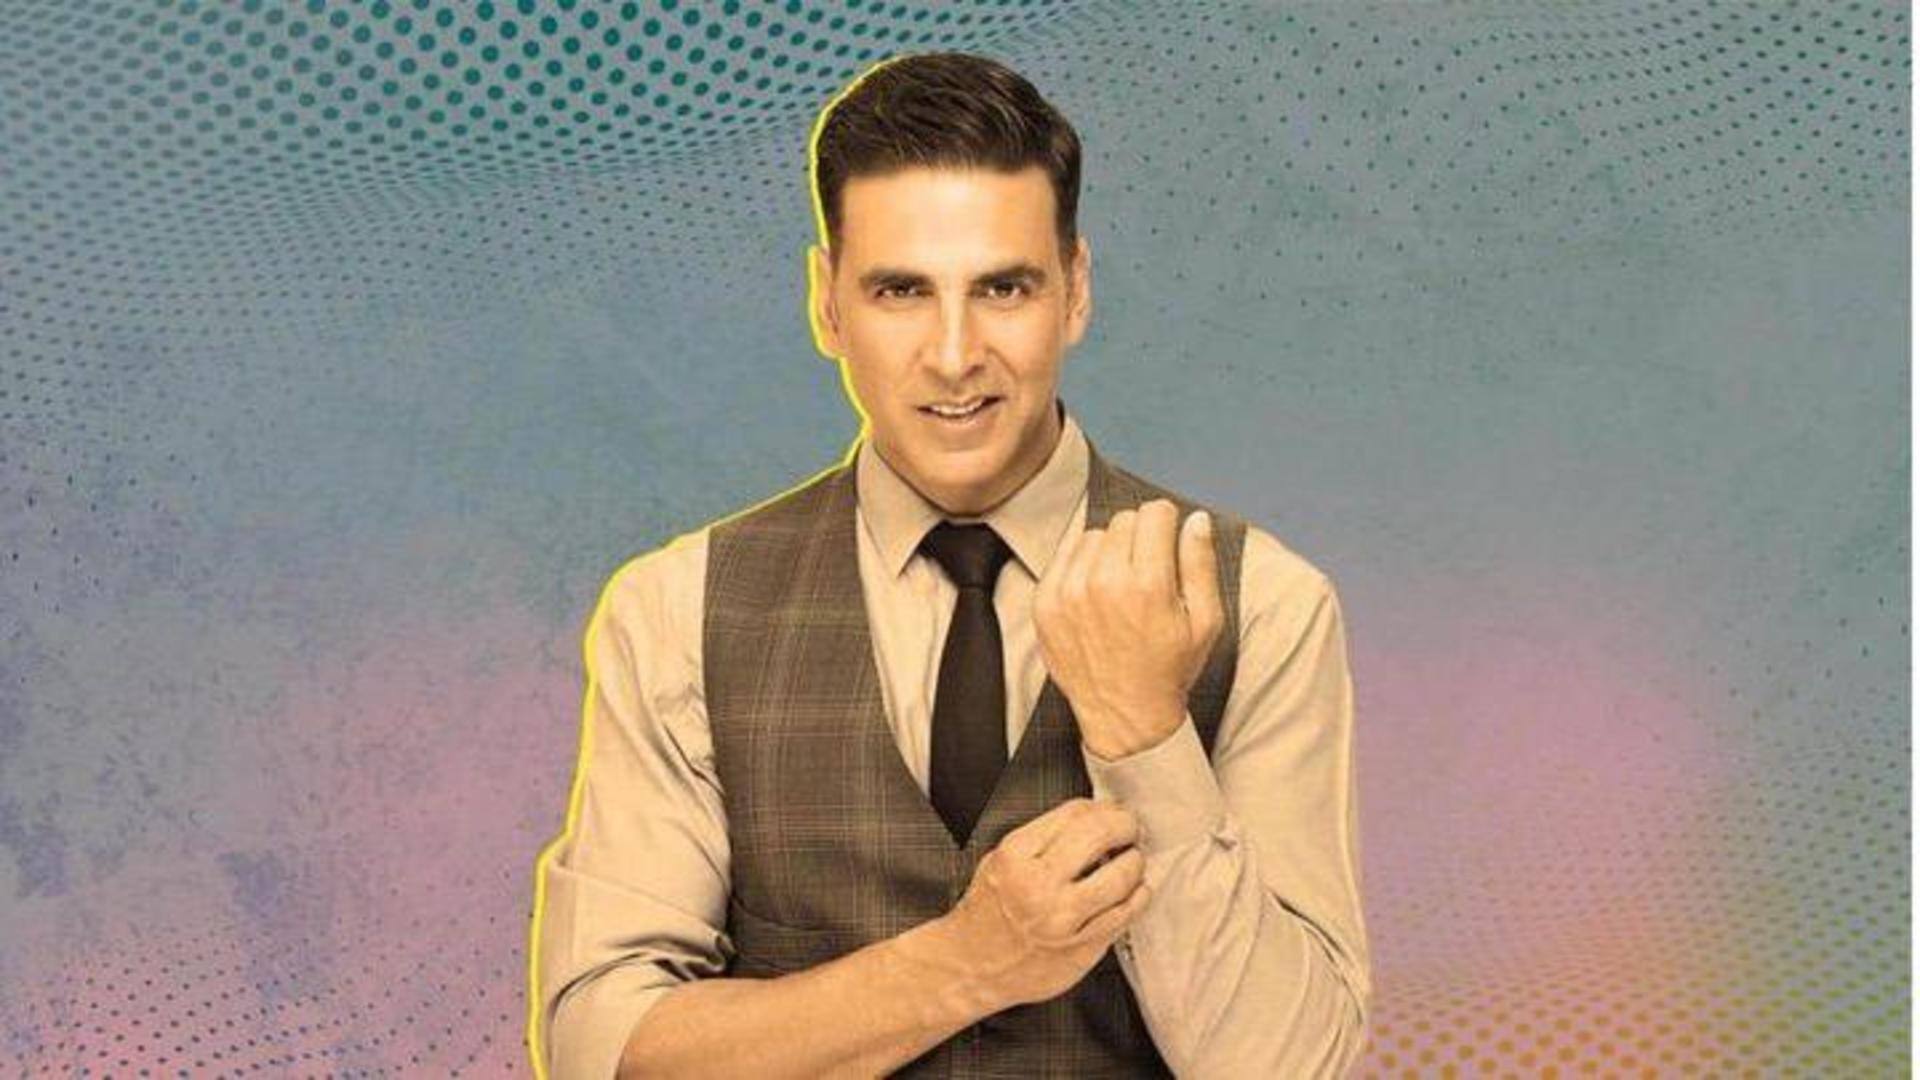 How Akshay Kumar can bounce back after 'Selfiee's shocking debacle